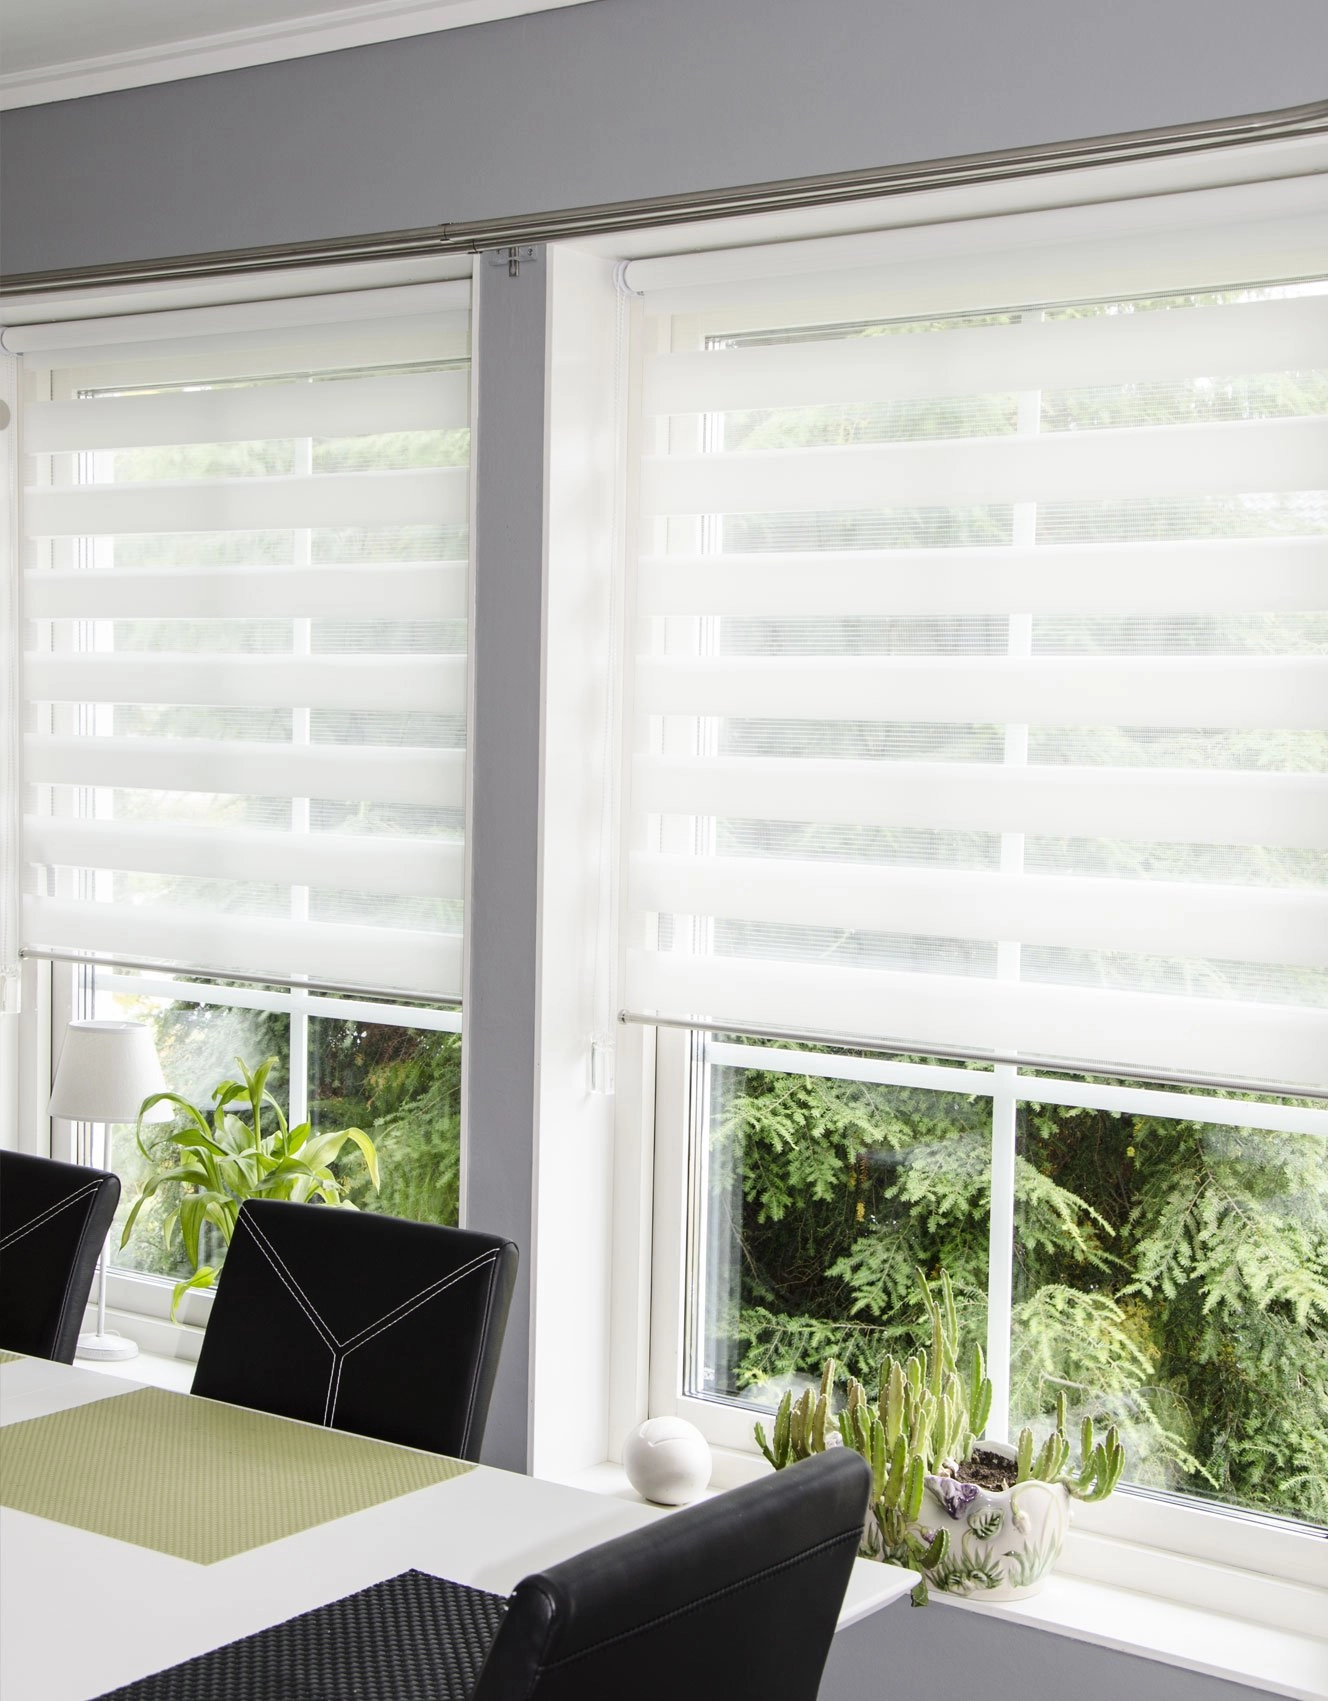 Day&Night roller blind, Day and Night roller blind, Day & Night roller blind